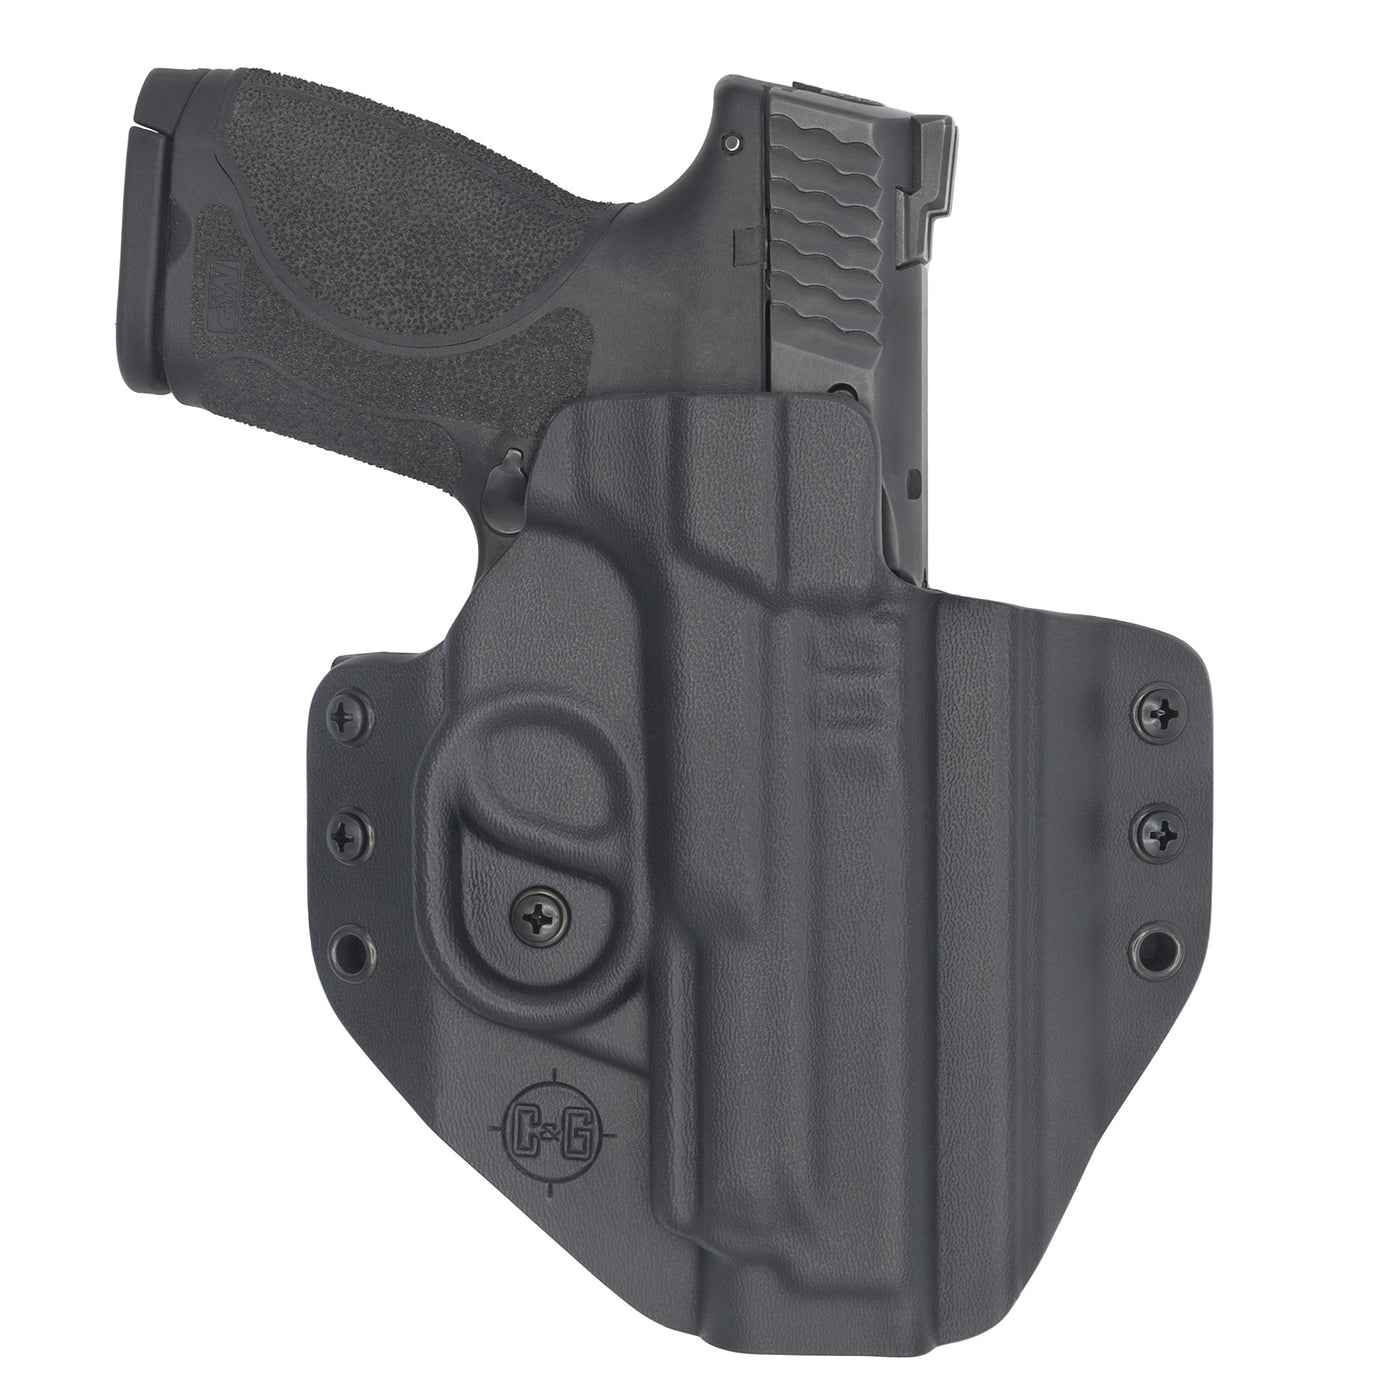 C&G Holsters quick ship Covert OWB kydex holster for Smith & Wesson M&P 2.0 9/40 4.25" in holstered position